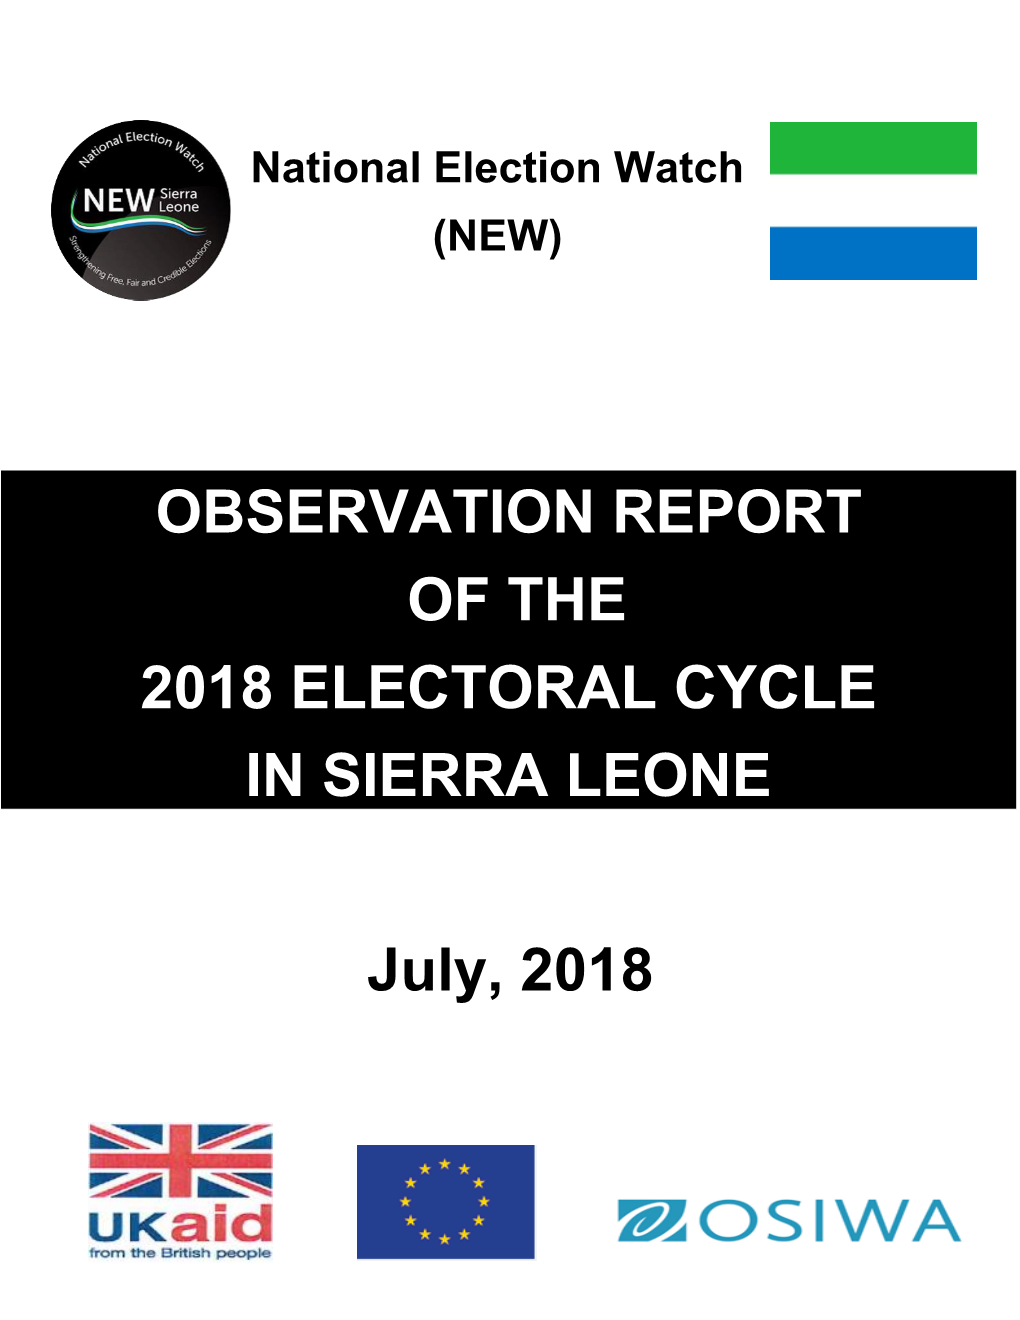 Observation Report of the 2018 Electoral Cycle in Sierra Leone